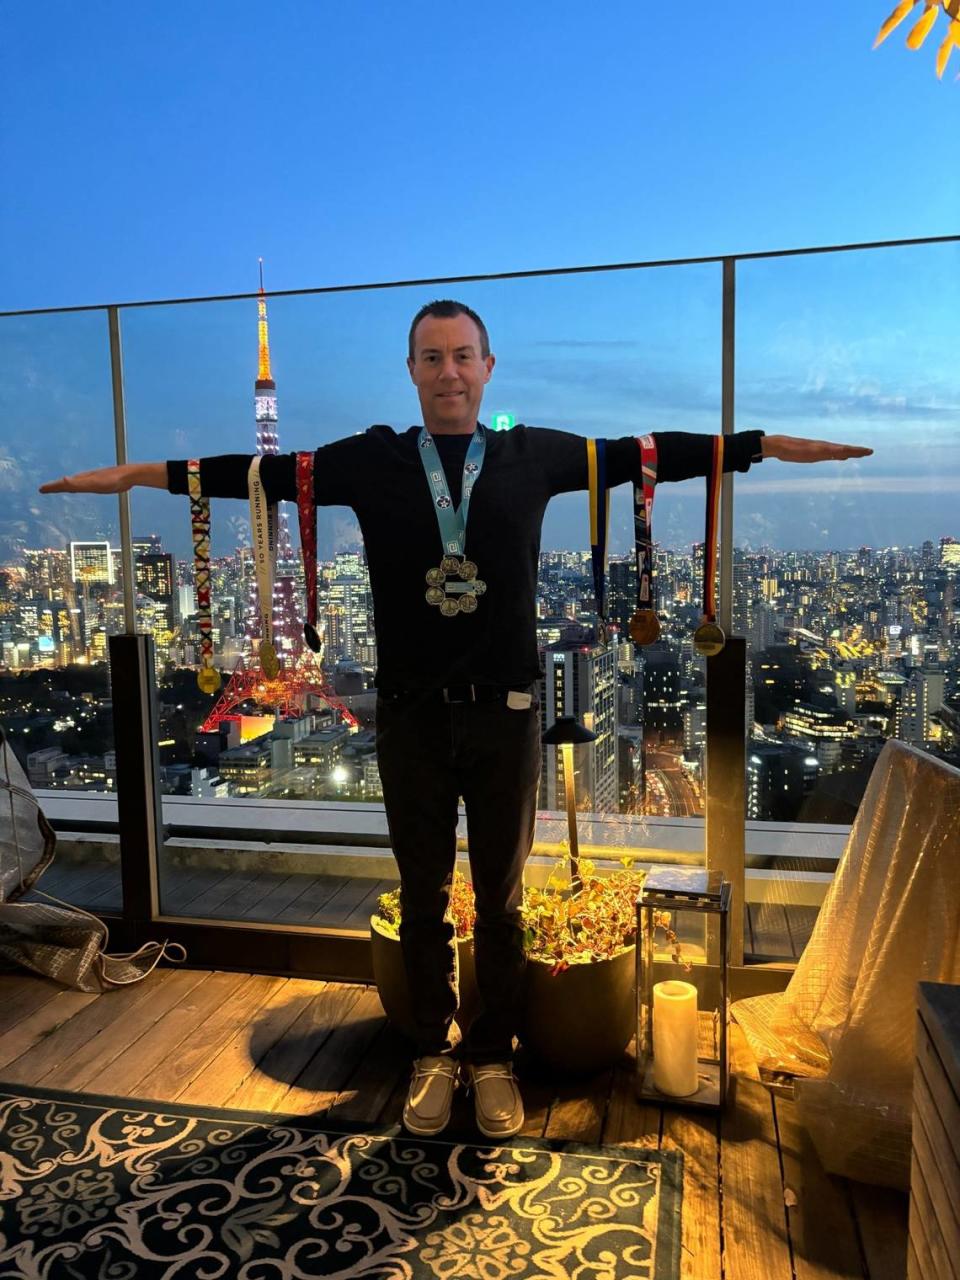 A survivor of the 1988 Carrollton bus crash, Mercer County Schools superintendent Jason Booher has completed all six of the world’s major marathons in Berlin, Boston, Chicago, London, New York and Tokyo while running to to raise awareness about the consequences of drunk driving.